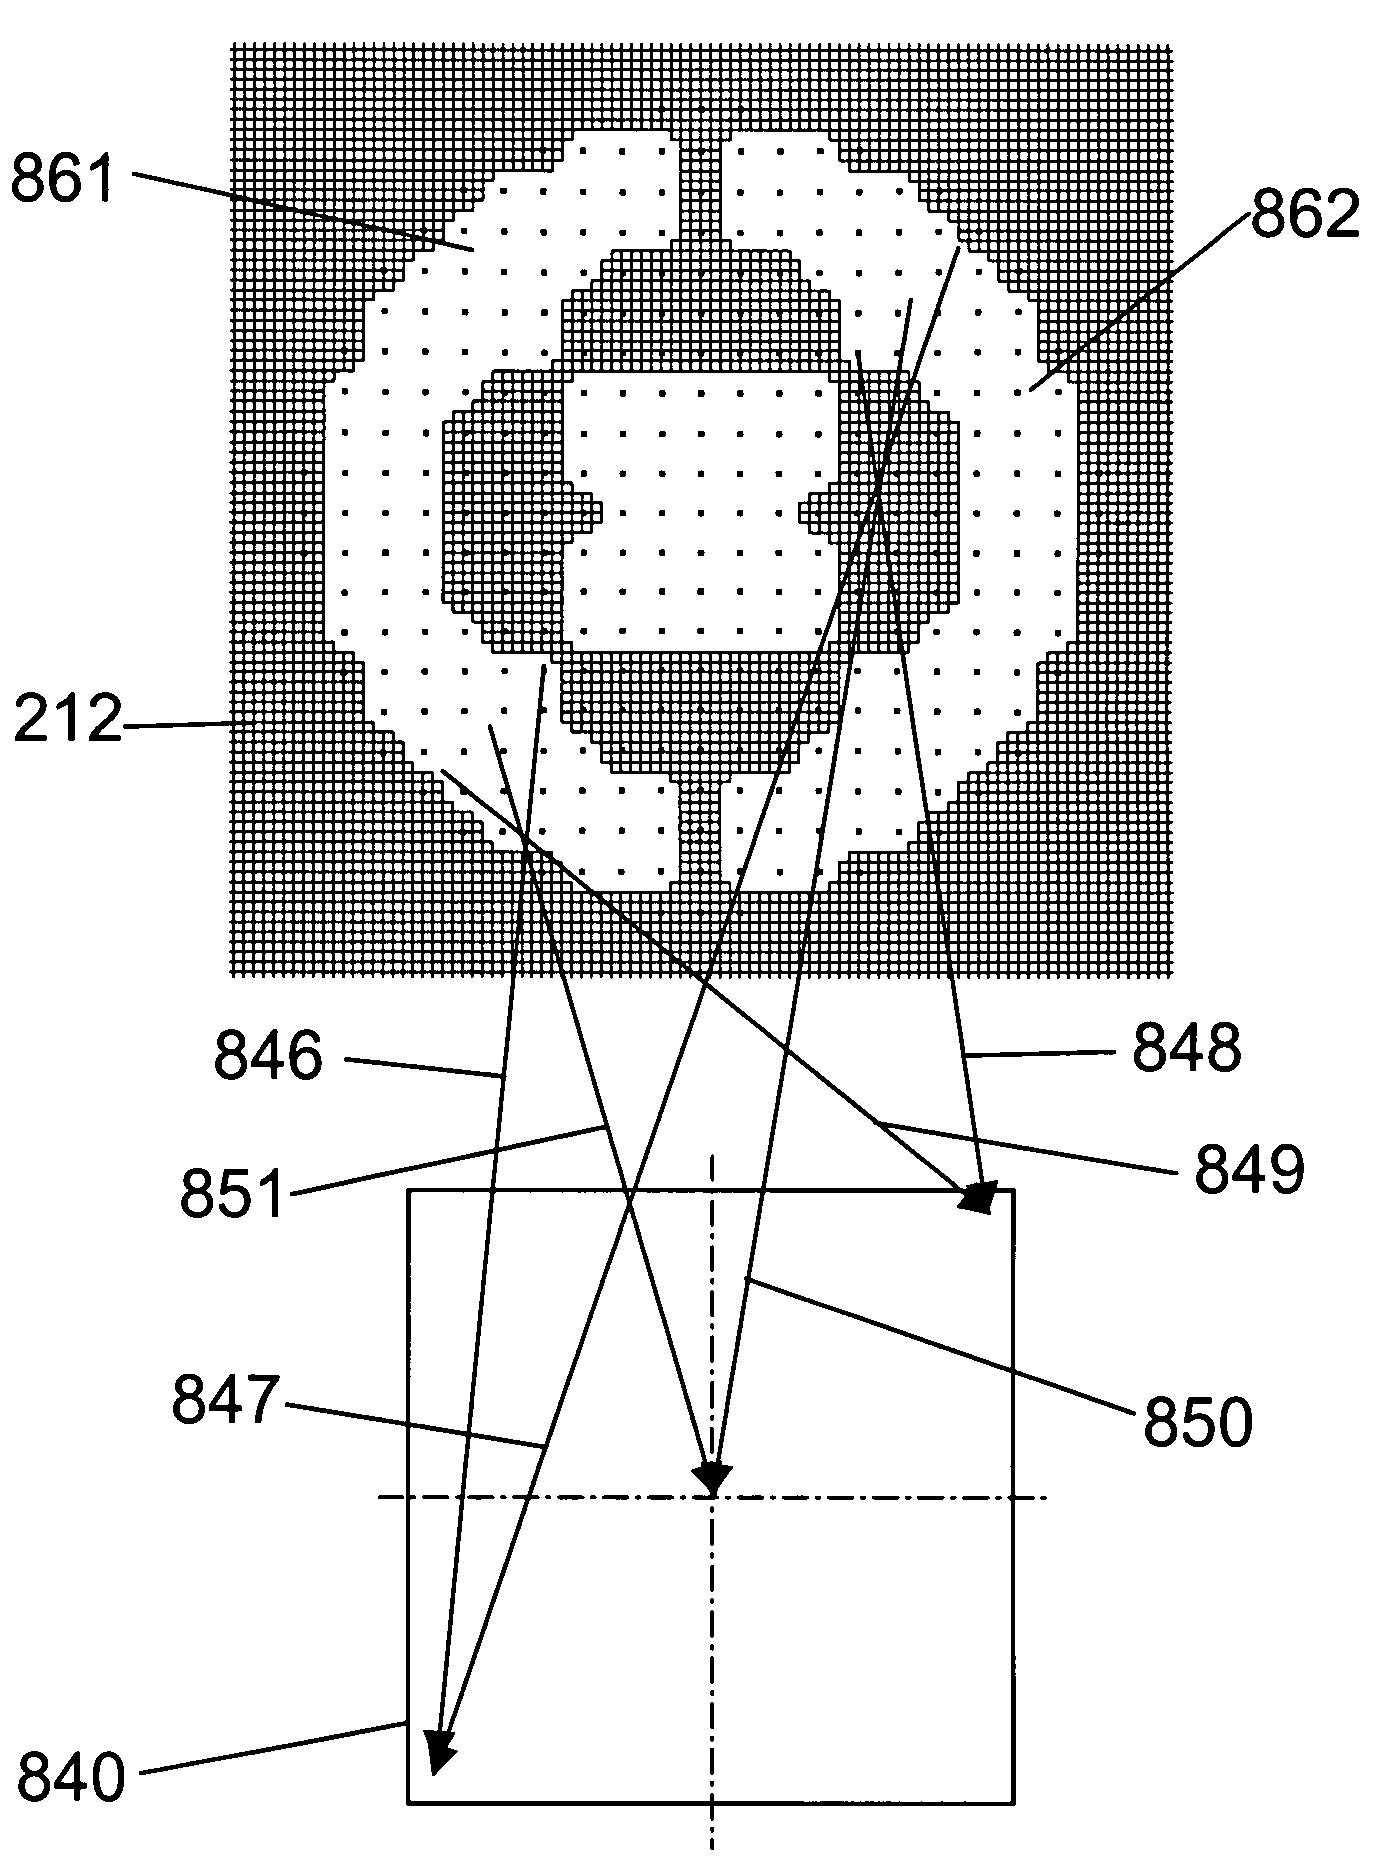 Optics for generation of high current density patterned charged particle beams